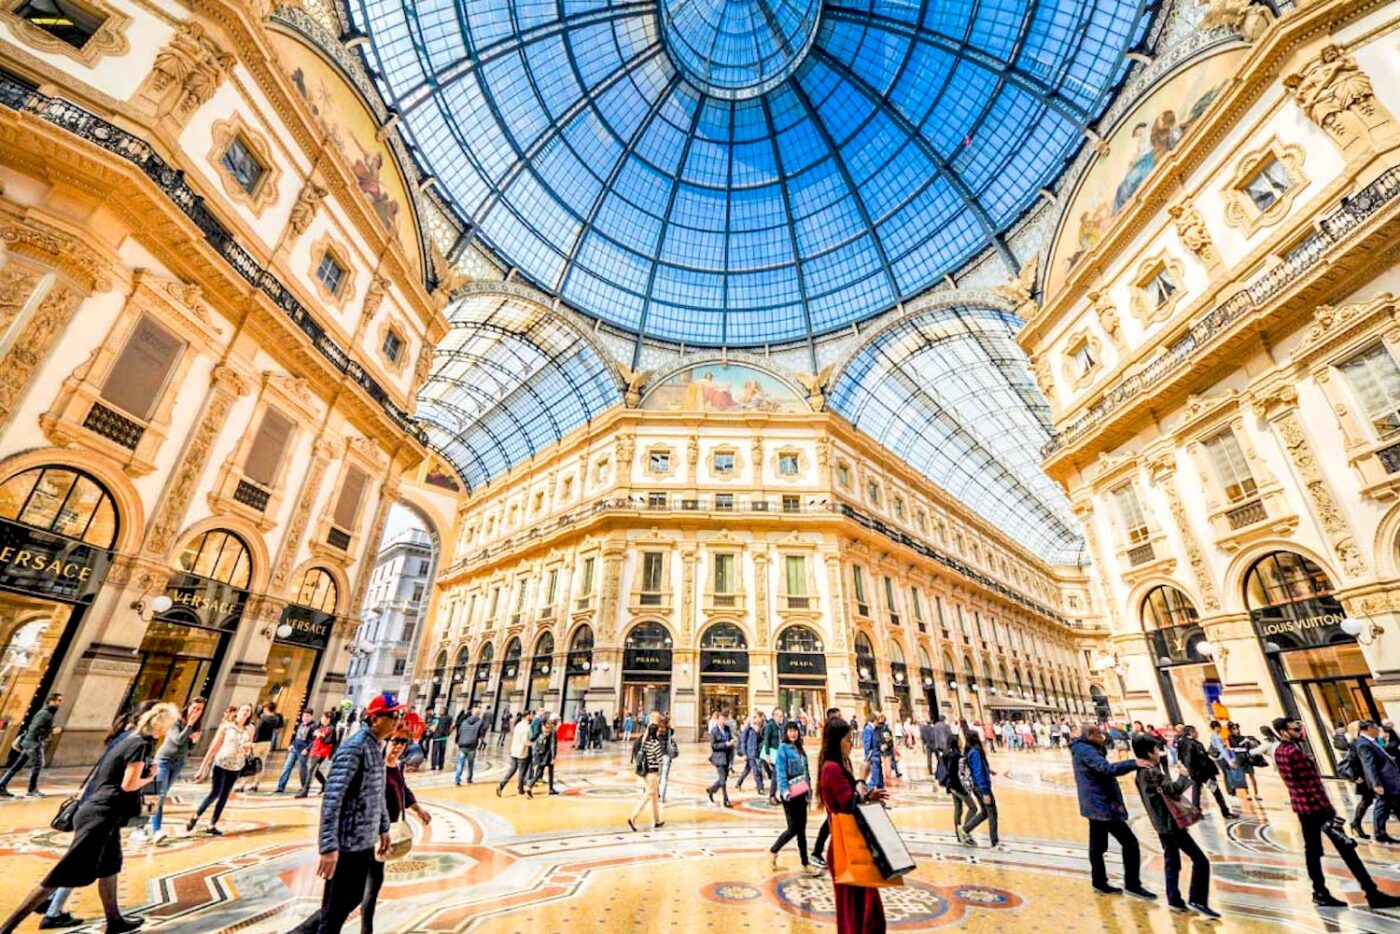 Going To Europe This Year? These Are The 10 Best Countries For Tax-Free Shopping